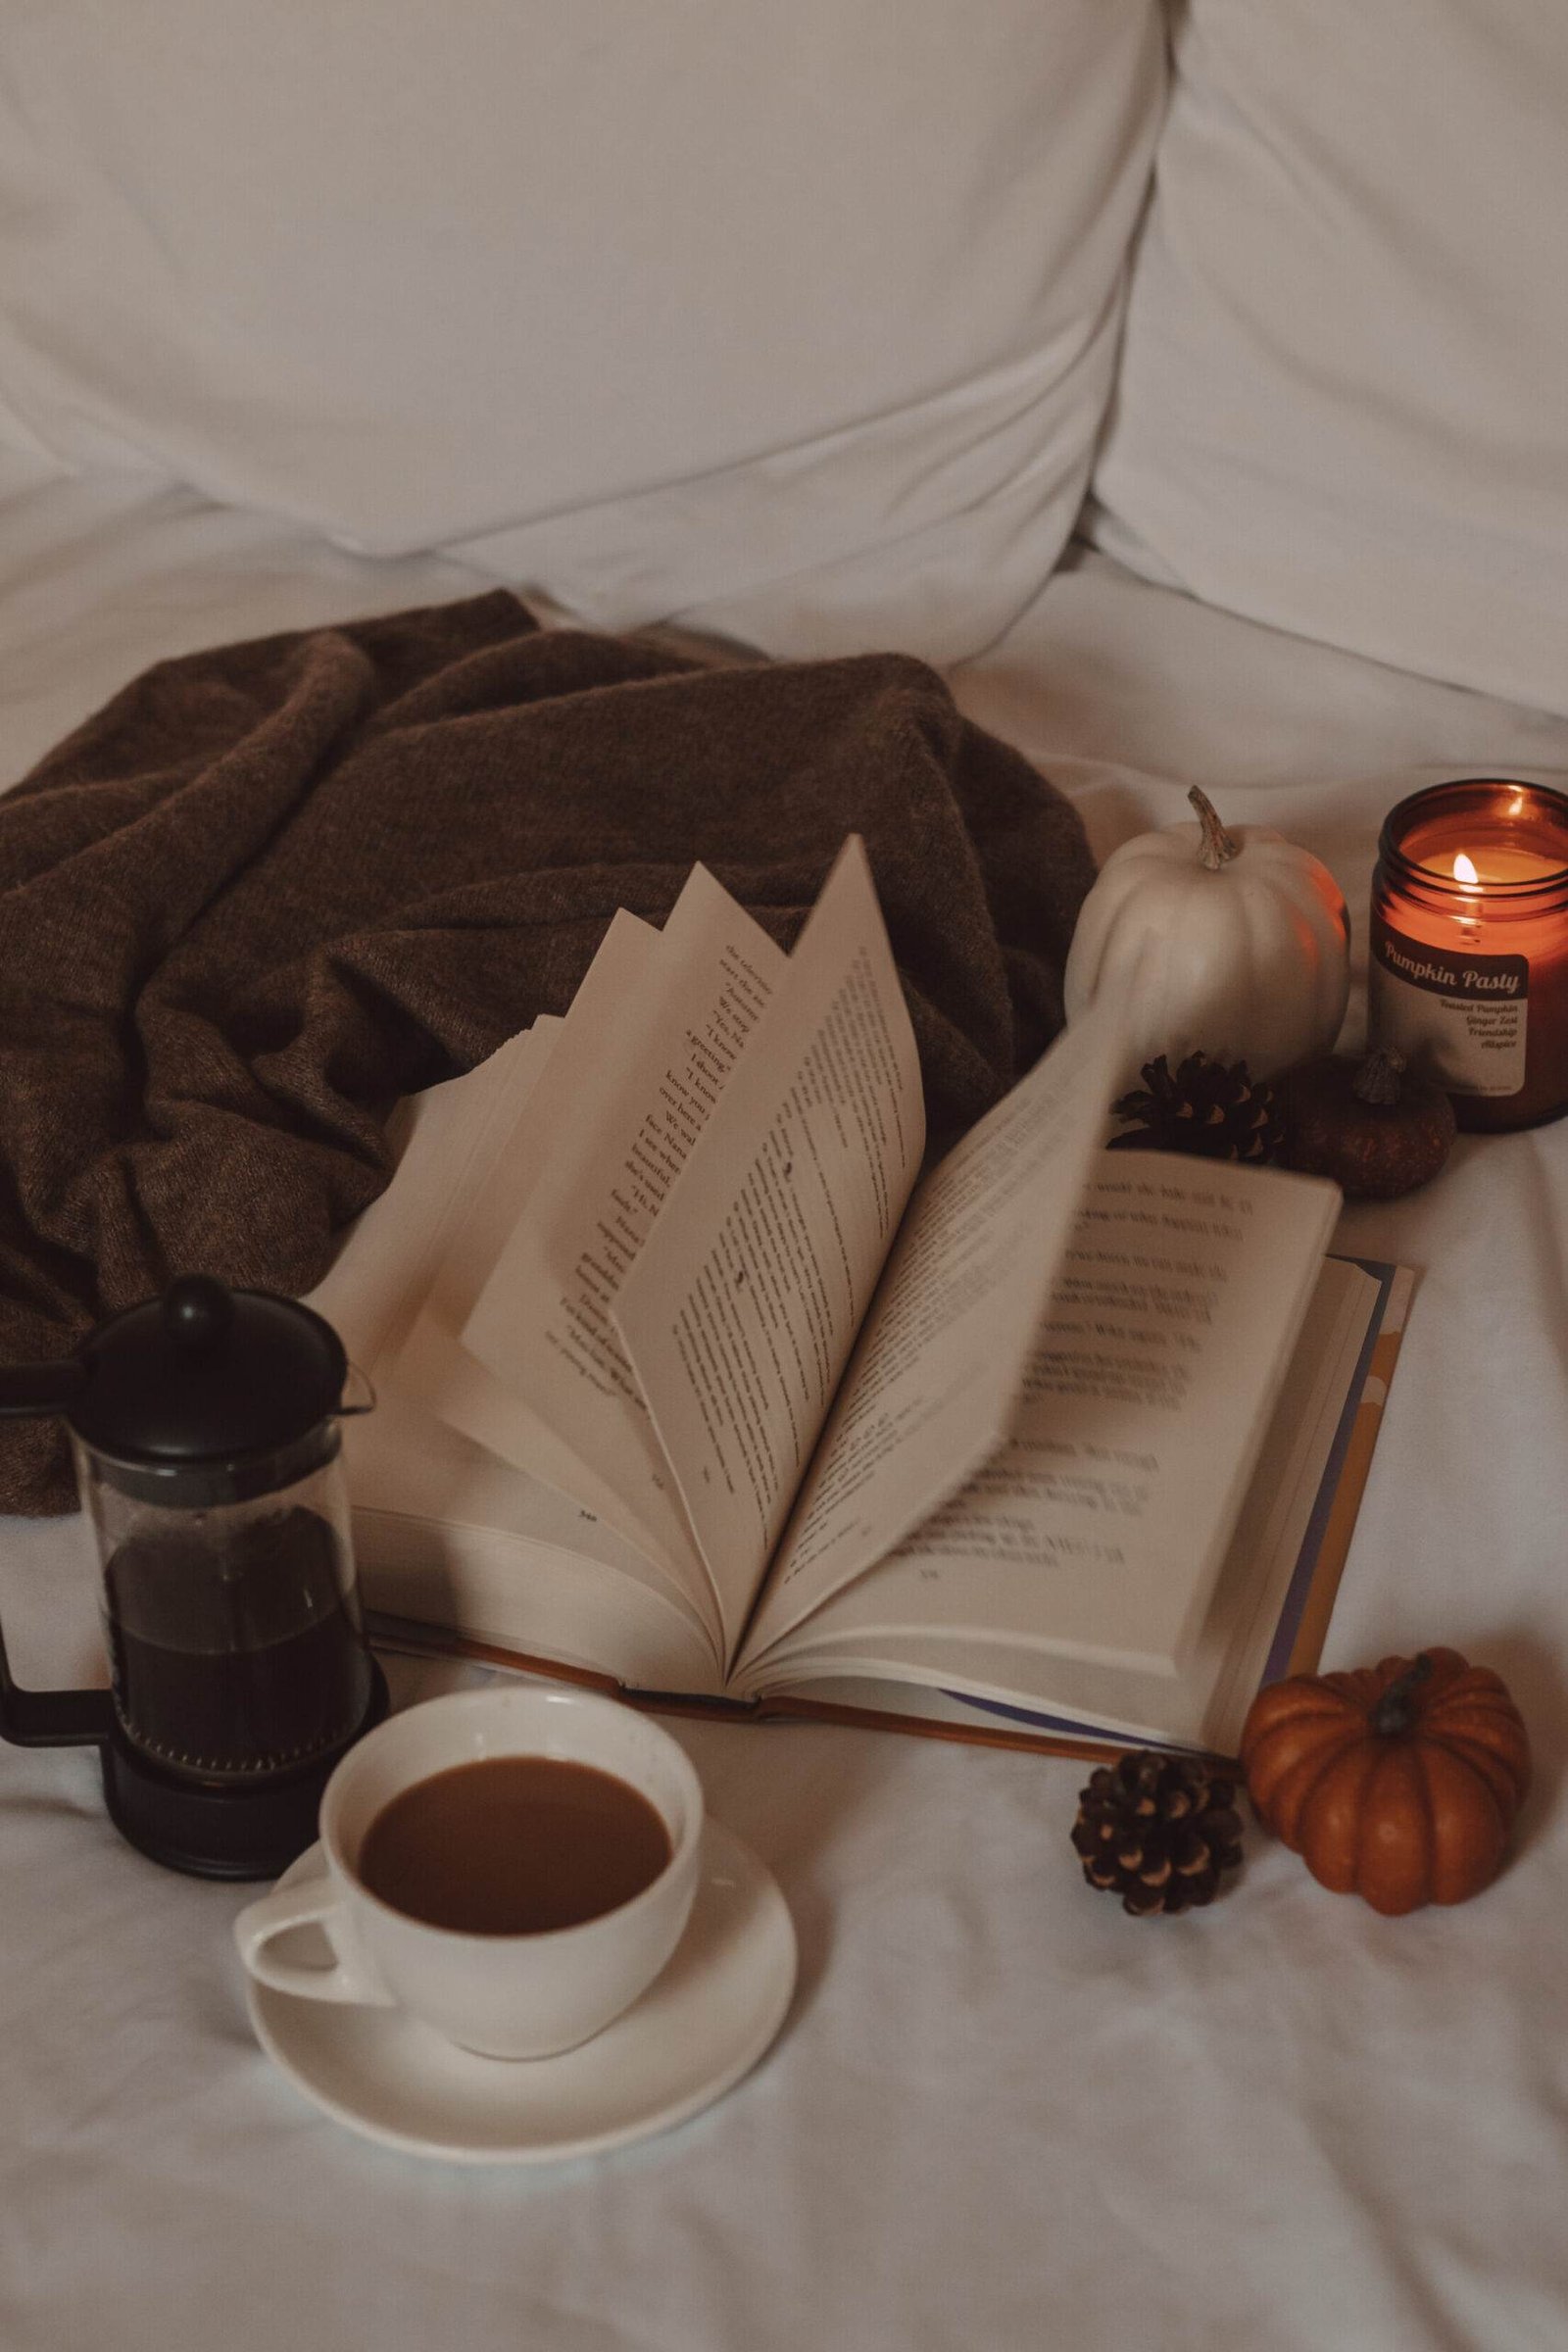 pages flipping in a book next to a french press and mug of coffee, mini pumpkins, and a candle